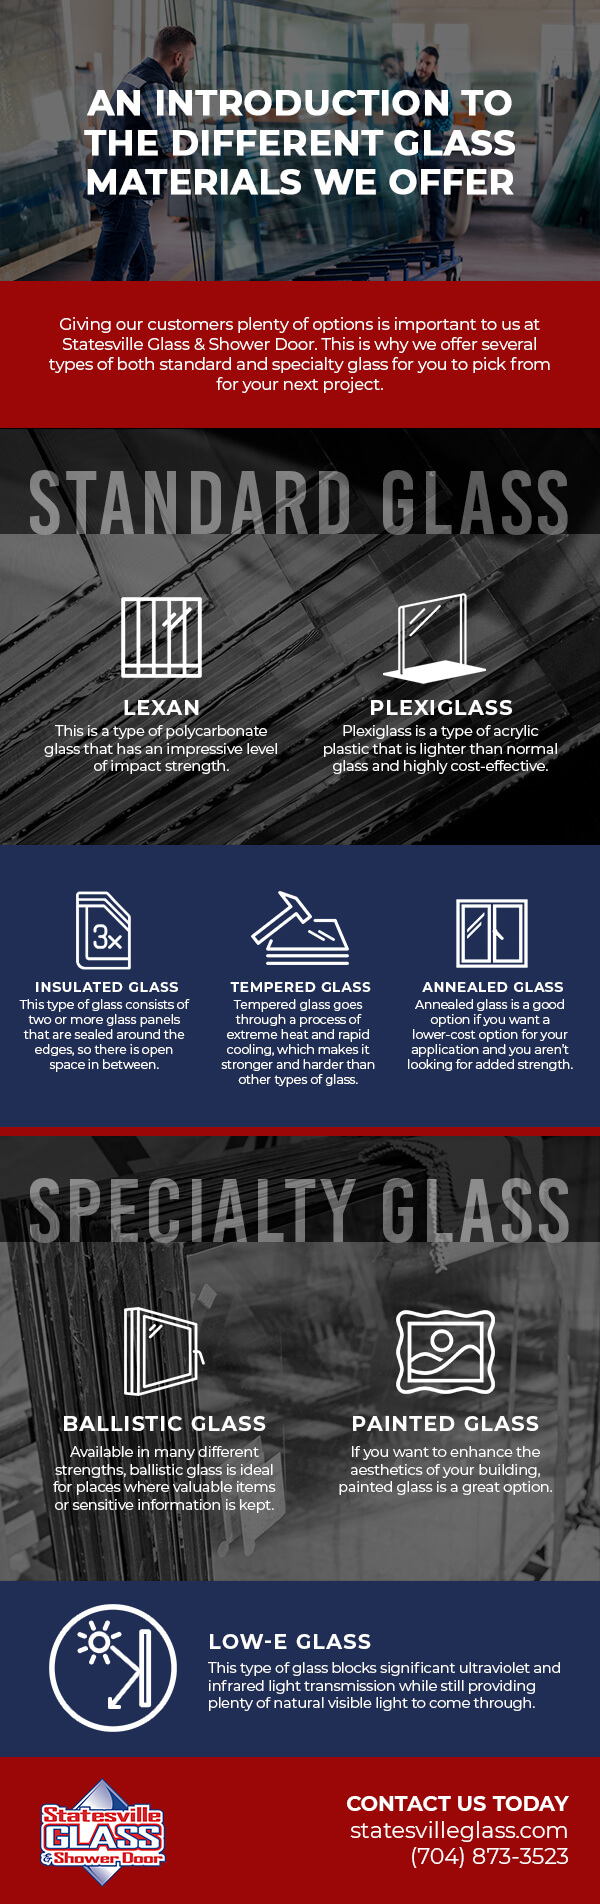 An Introduction to the Different Glass Materials We Offer